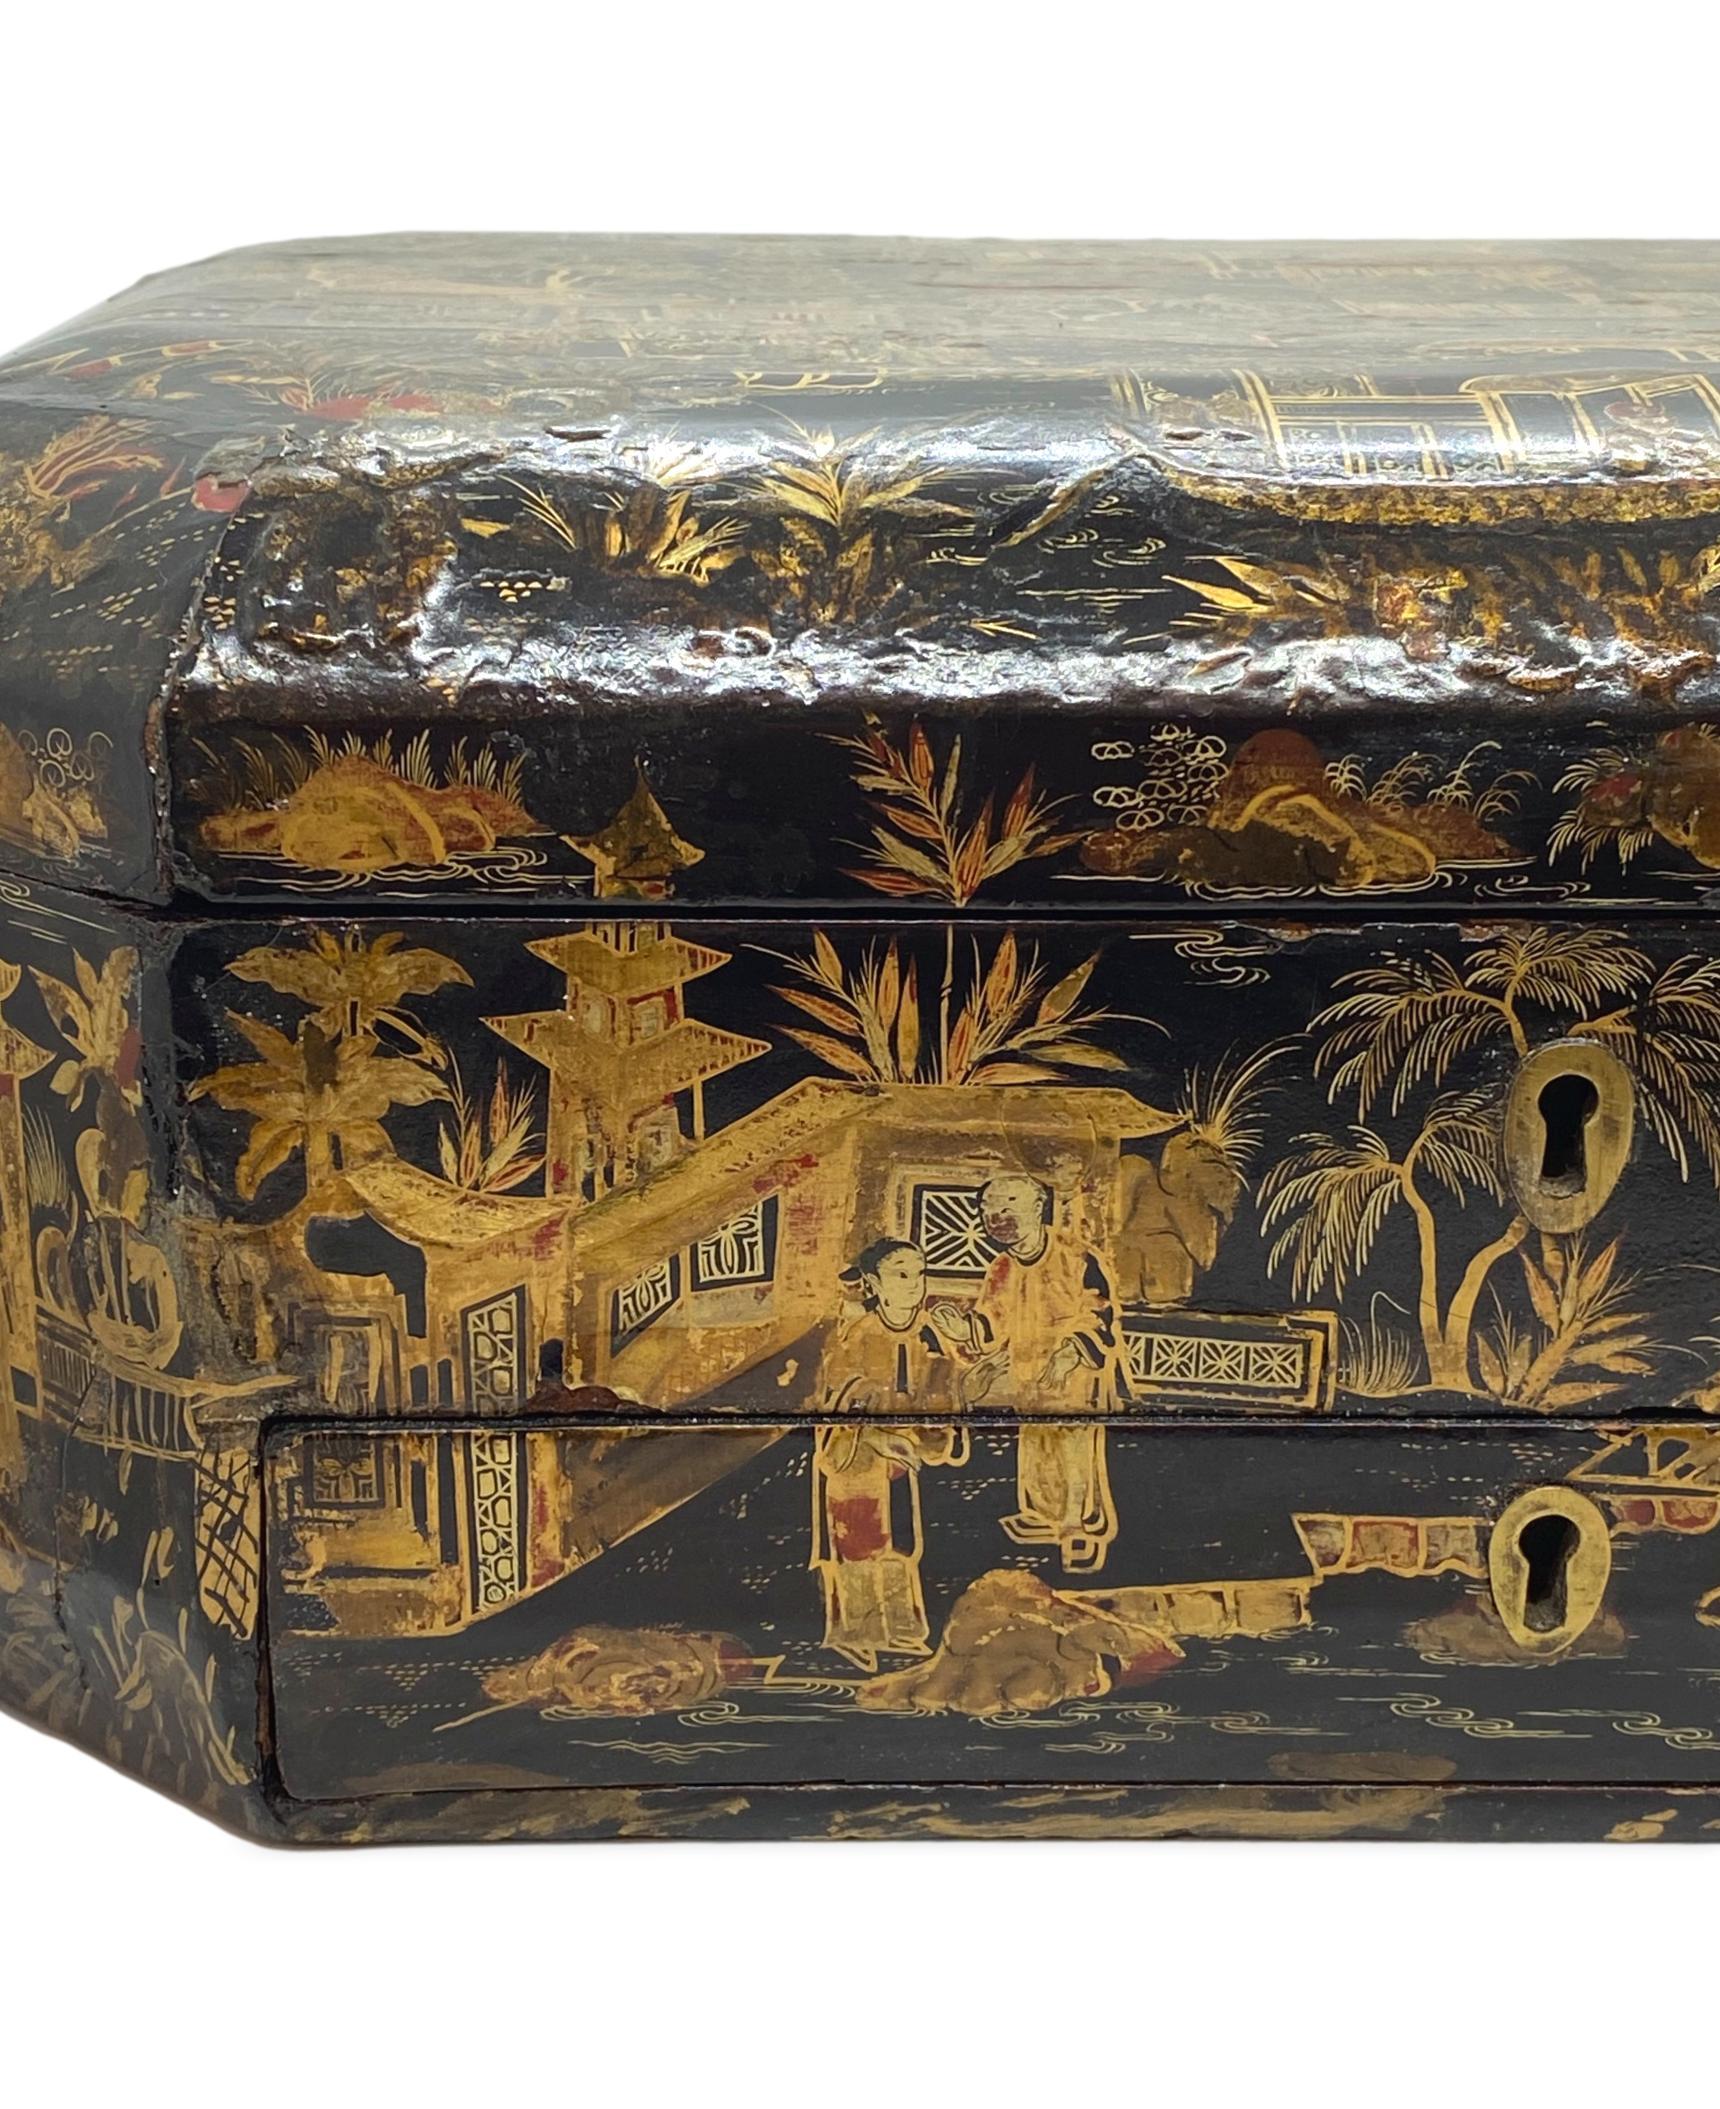 European 18th Century Chinoiserie Work Box with Fitted Interior, Black, Gold, Red-Lacquer